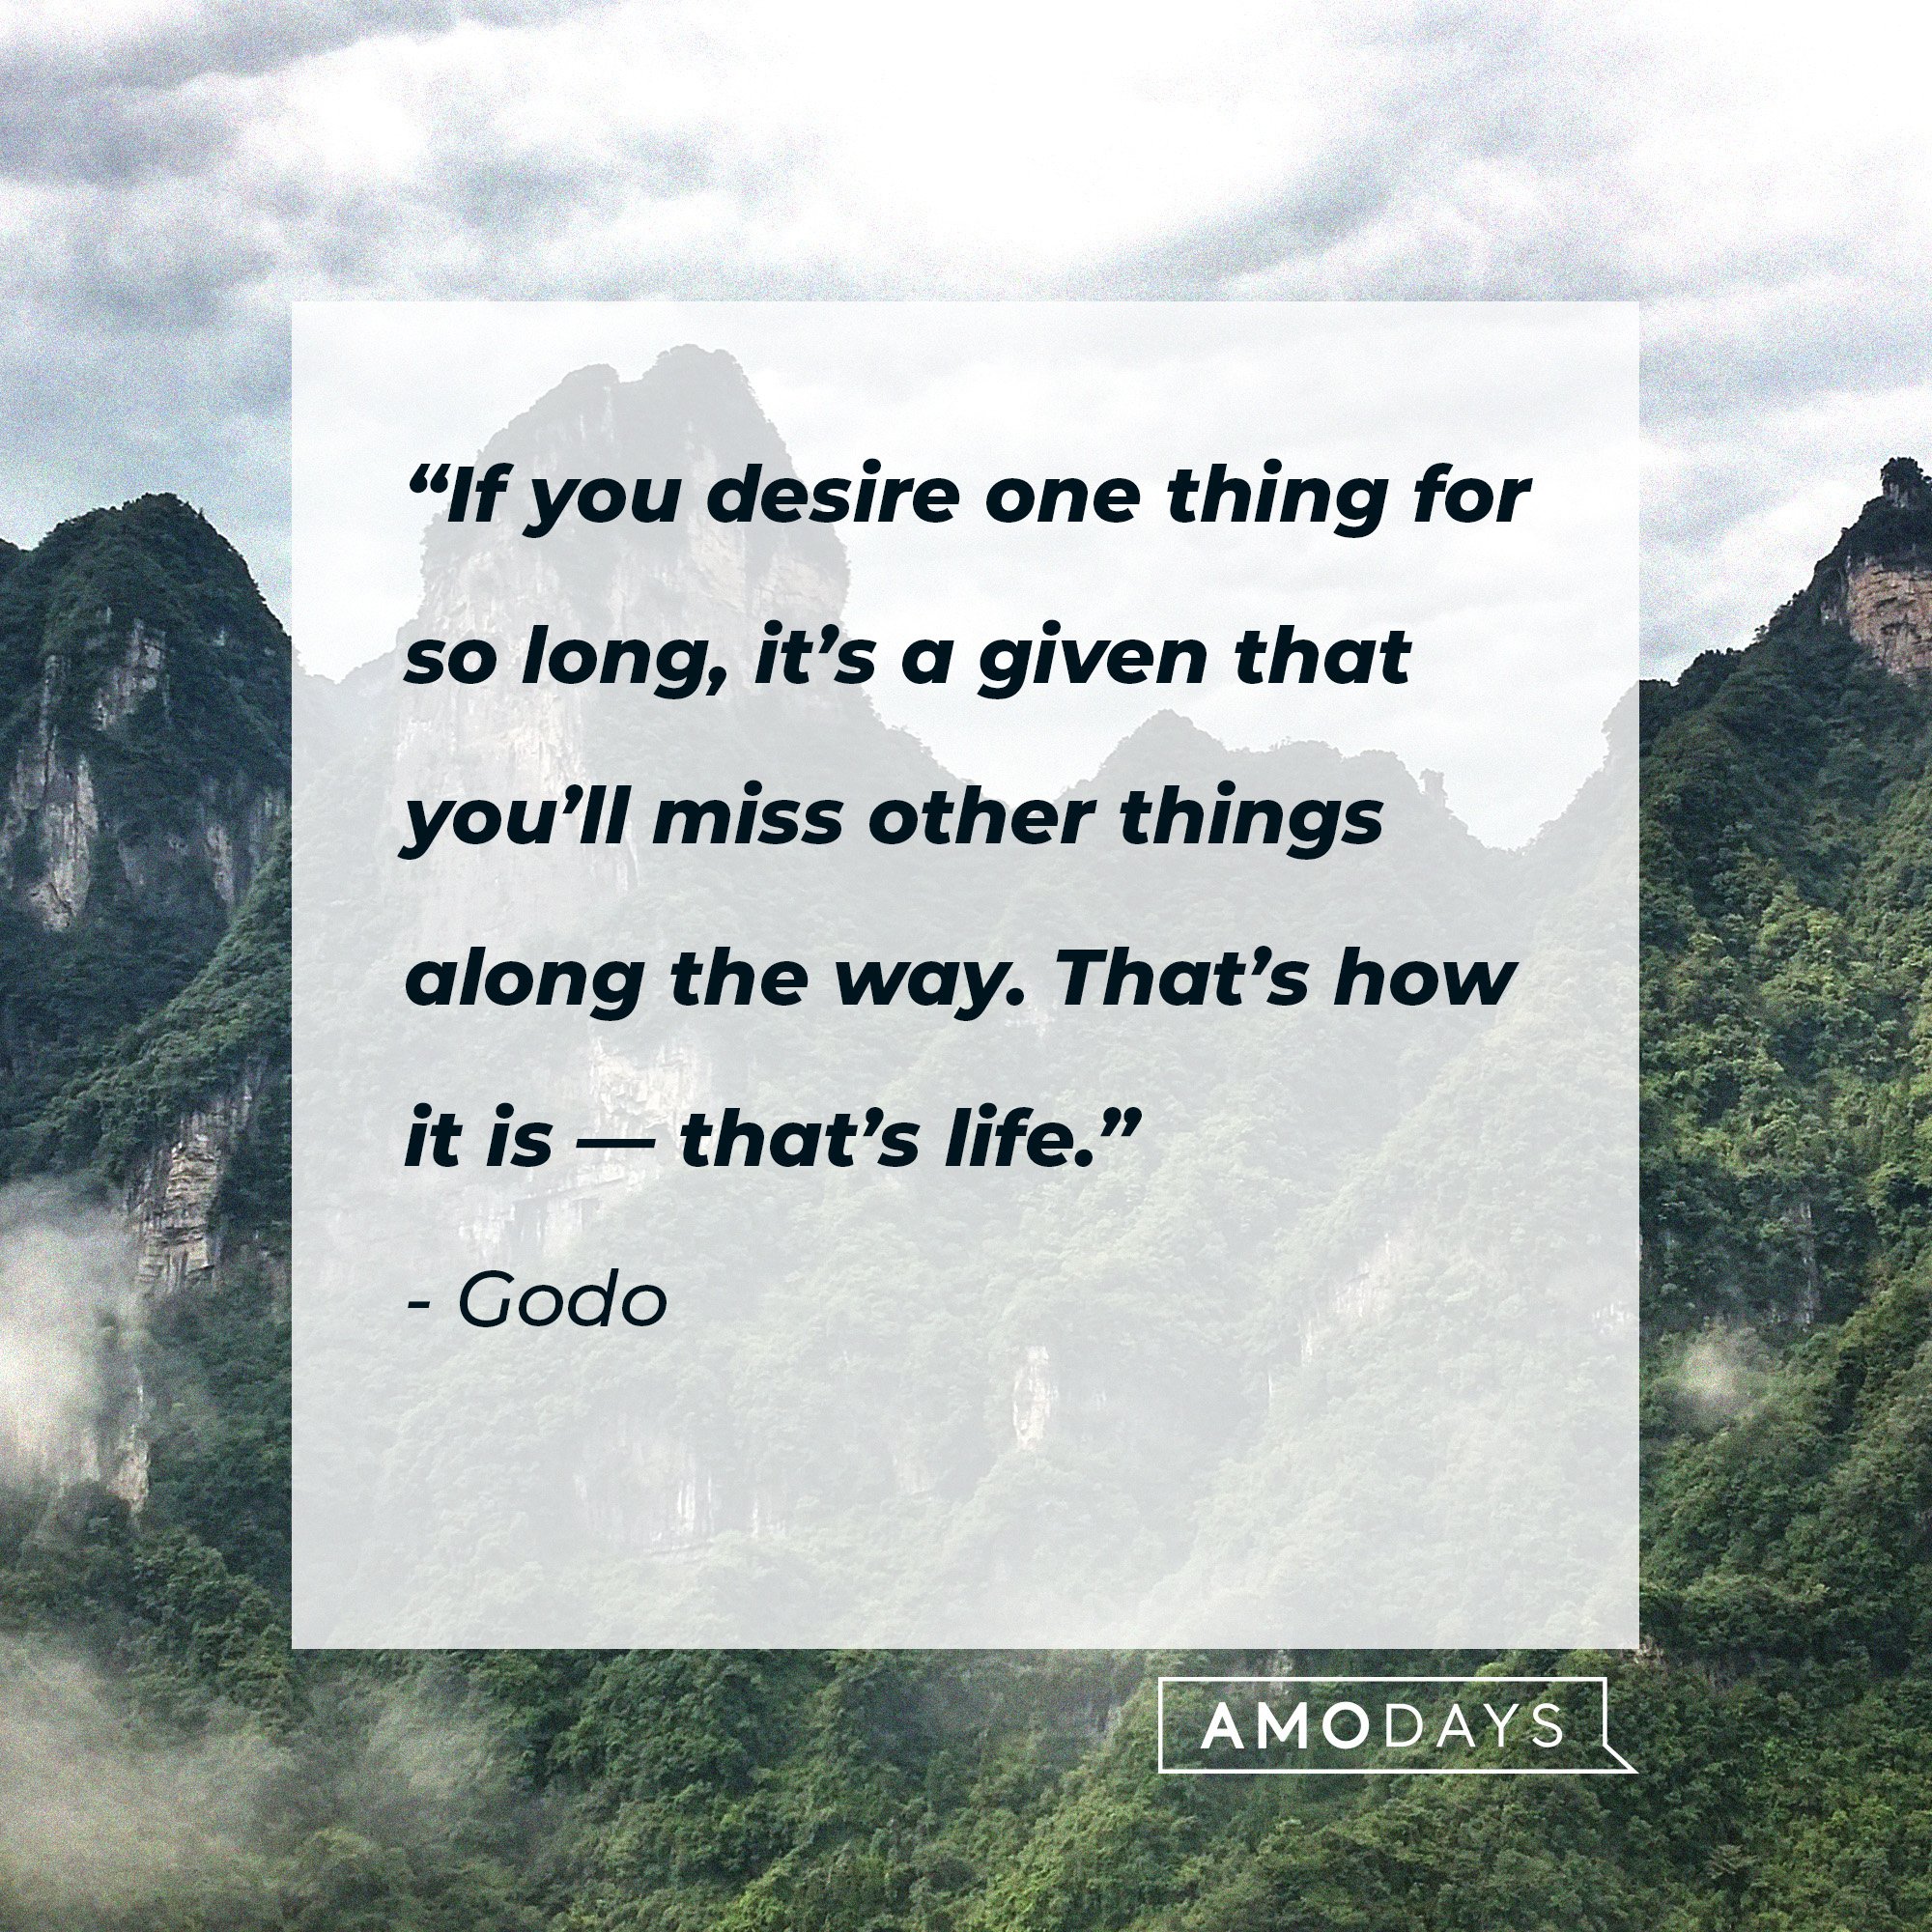 Godo's quote: “If you desire one thing for so long, it’s a given that you’ll miss other things along the way. That’s how it is — that’s life.” | Image: AmoDays